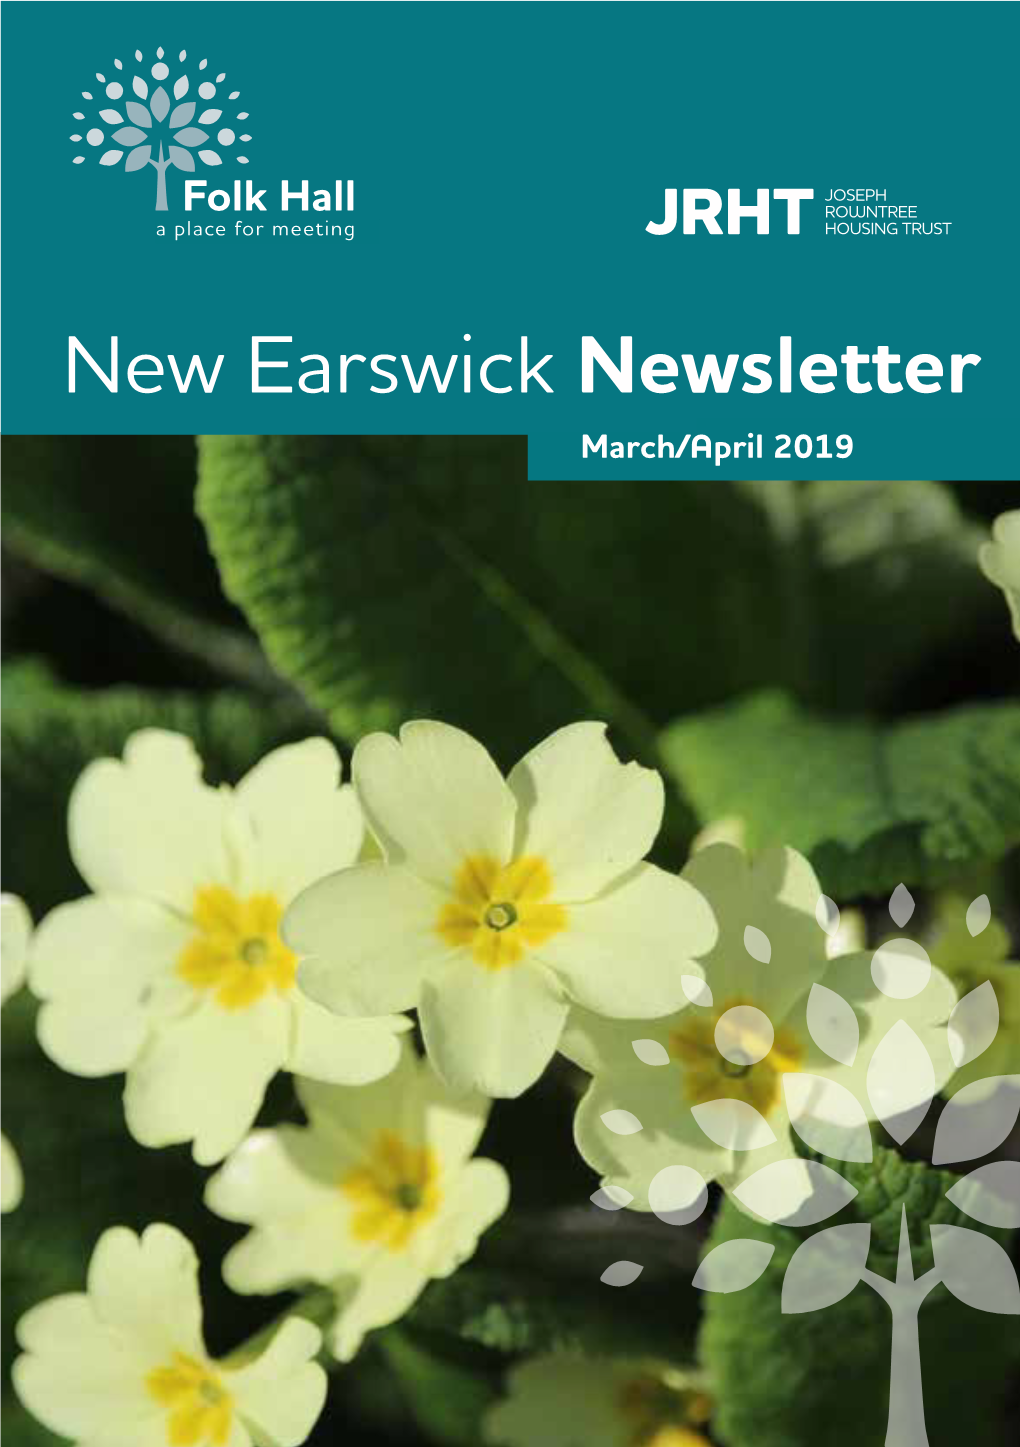 New Earswick Newsletter March/April 2019